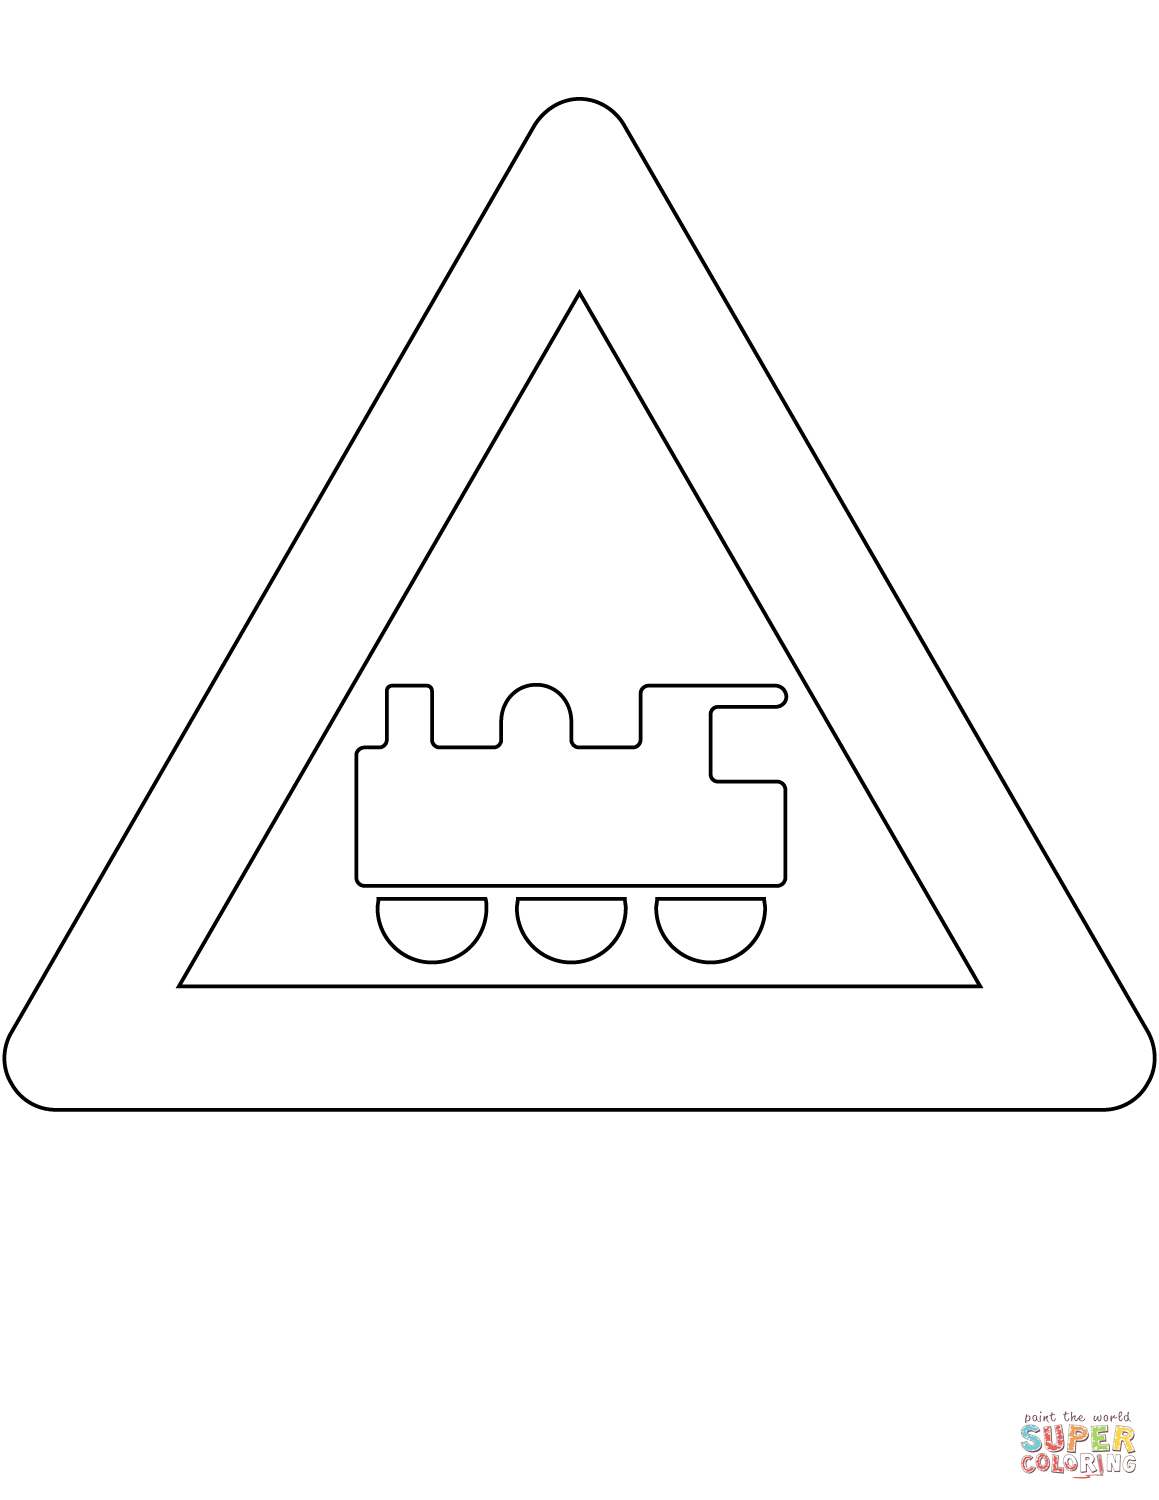 Level crossing without barriers ahead sign in denmark coloring page free printable coloring pages